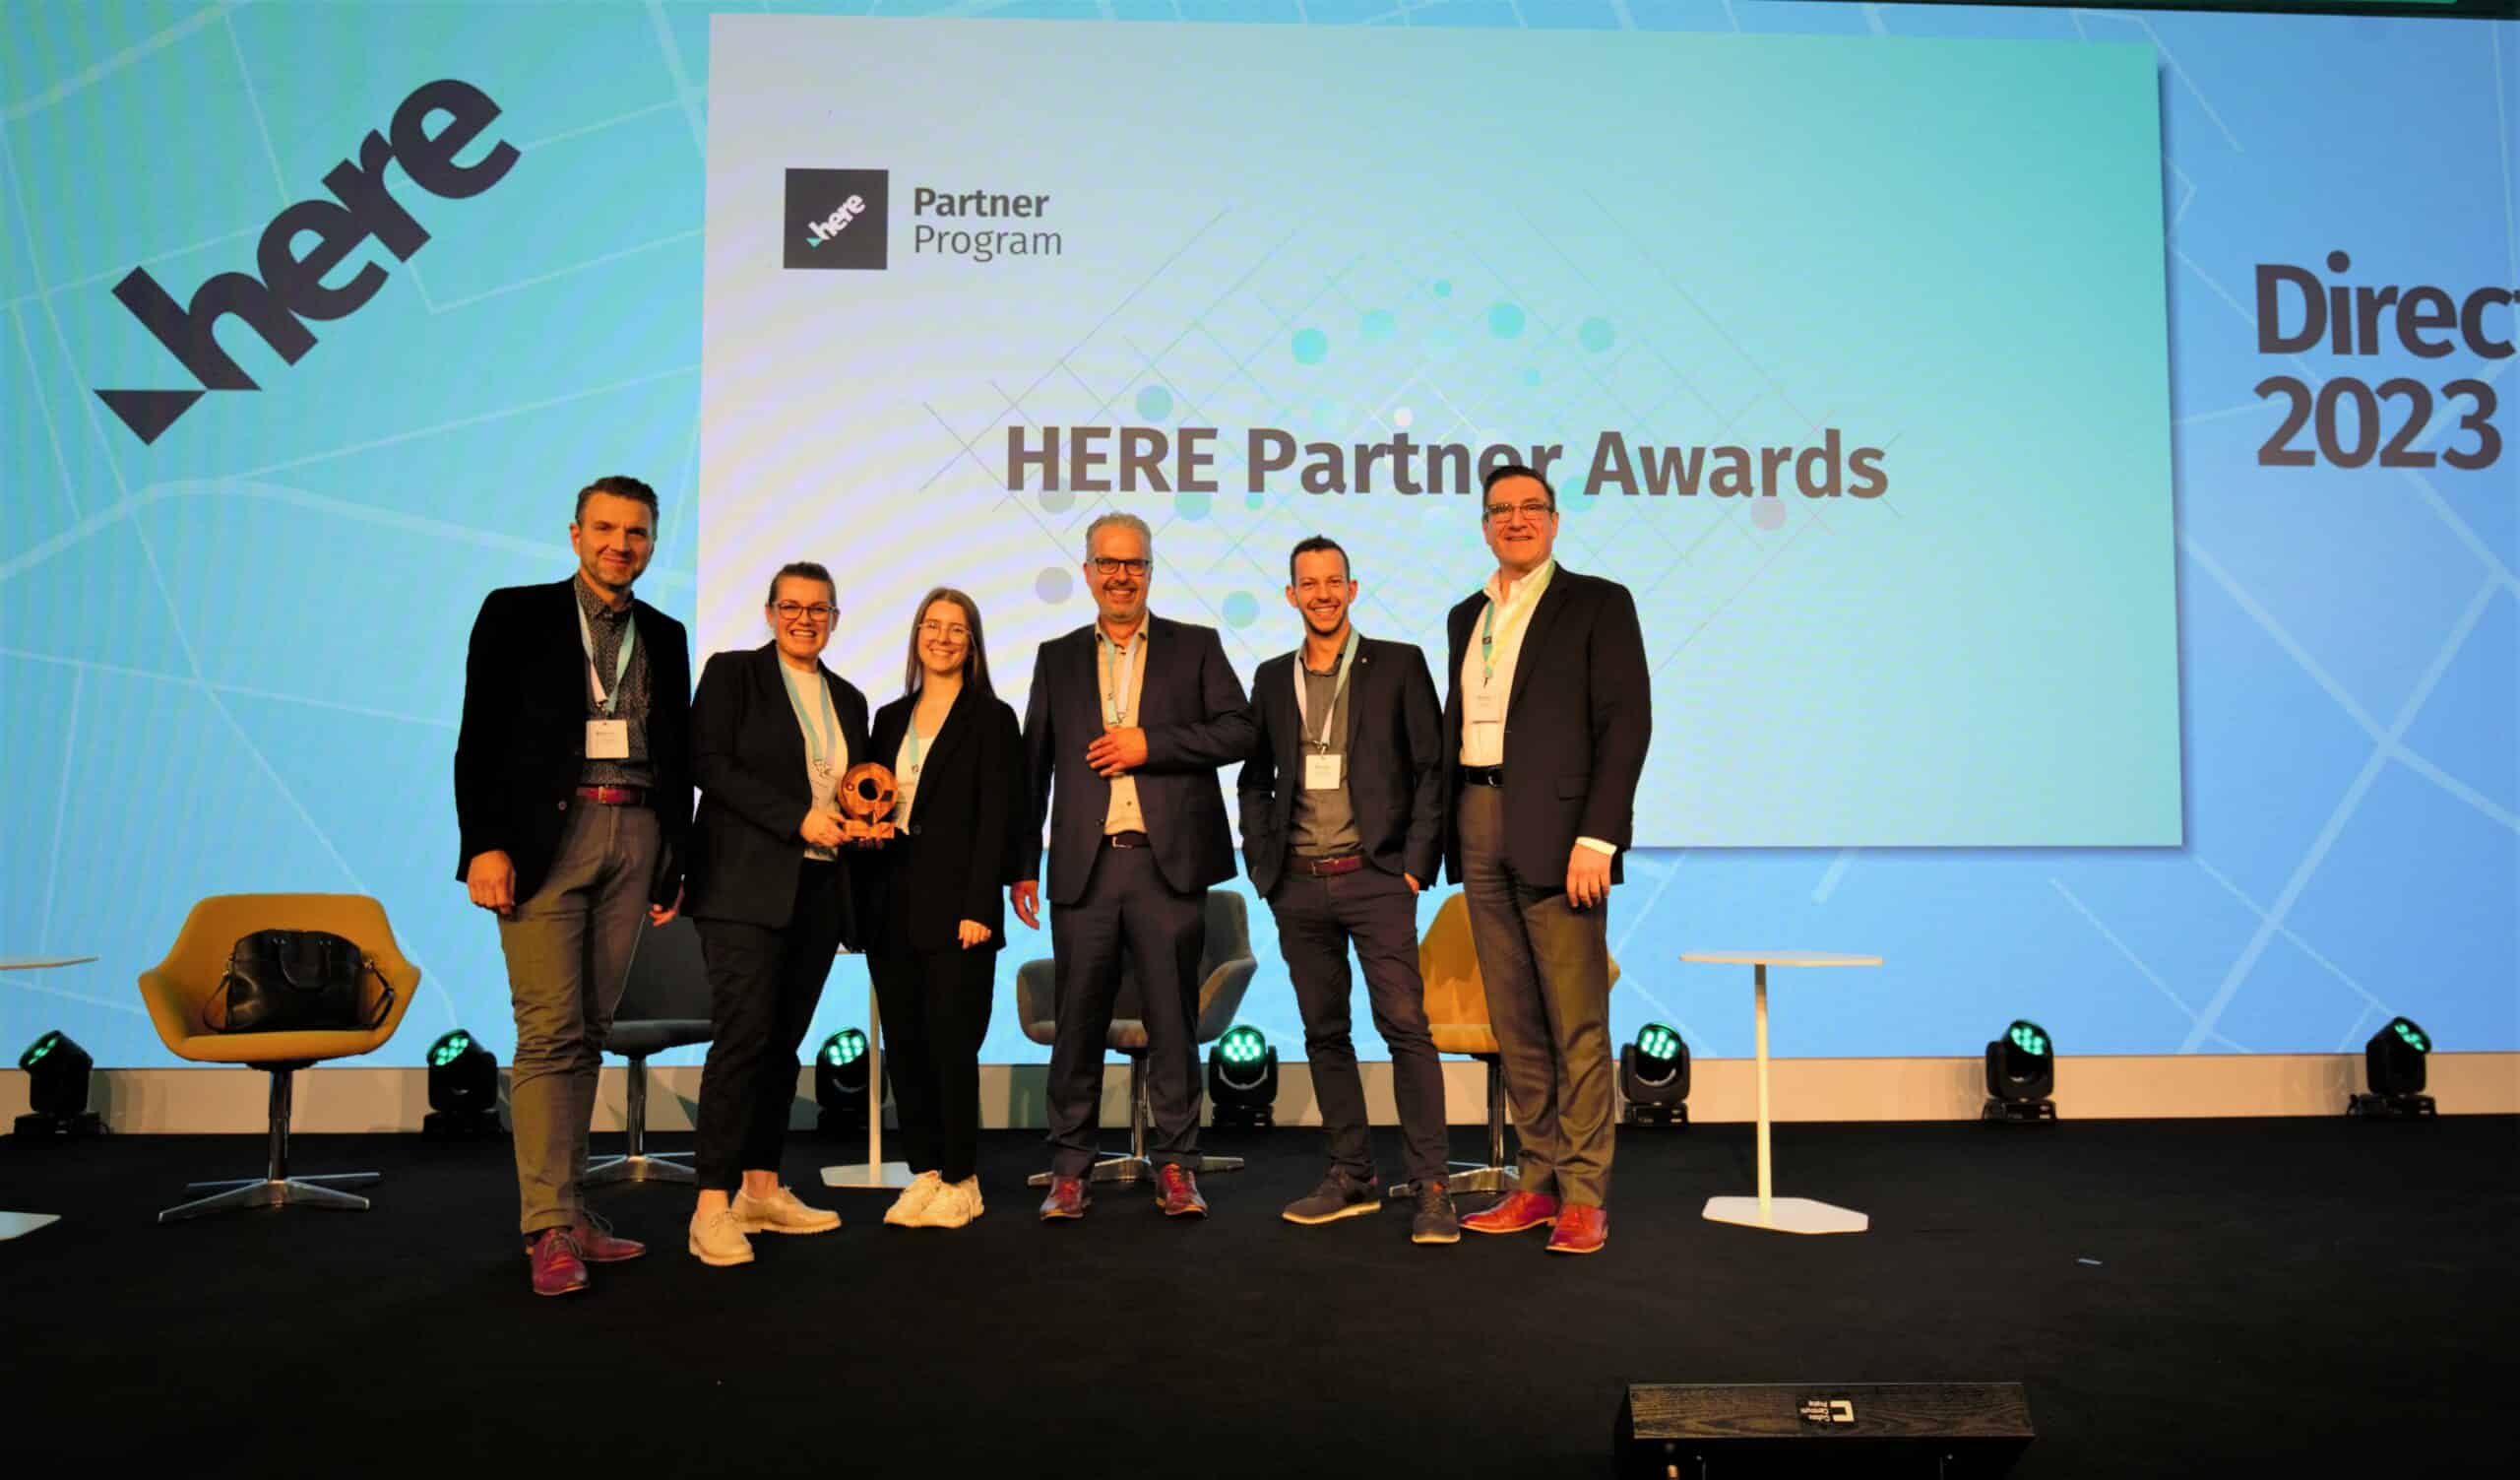 Andreas Wenzel (Sales Director), Carina Ziegelmüller (Head of Location Services Distribution & Partner Relations), Jessica Hablowetz (Head of Marketing), Ray Roberts-York (Managing Director), Kevin Roberts-York (Senior Sales Consultant), John Ramieri (VP of Global Partners at HERE Technologies)